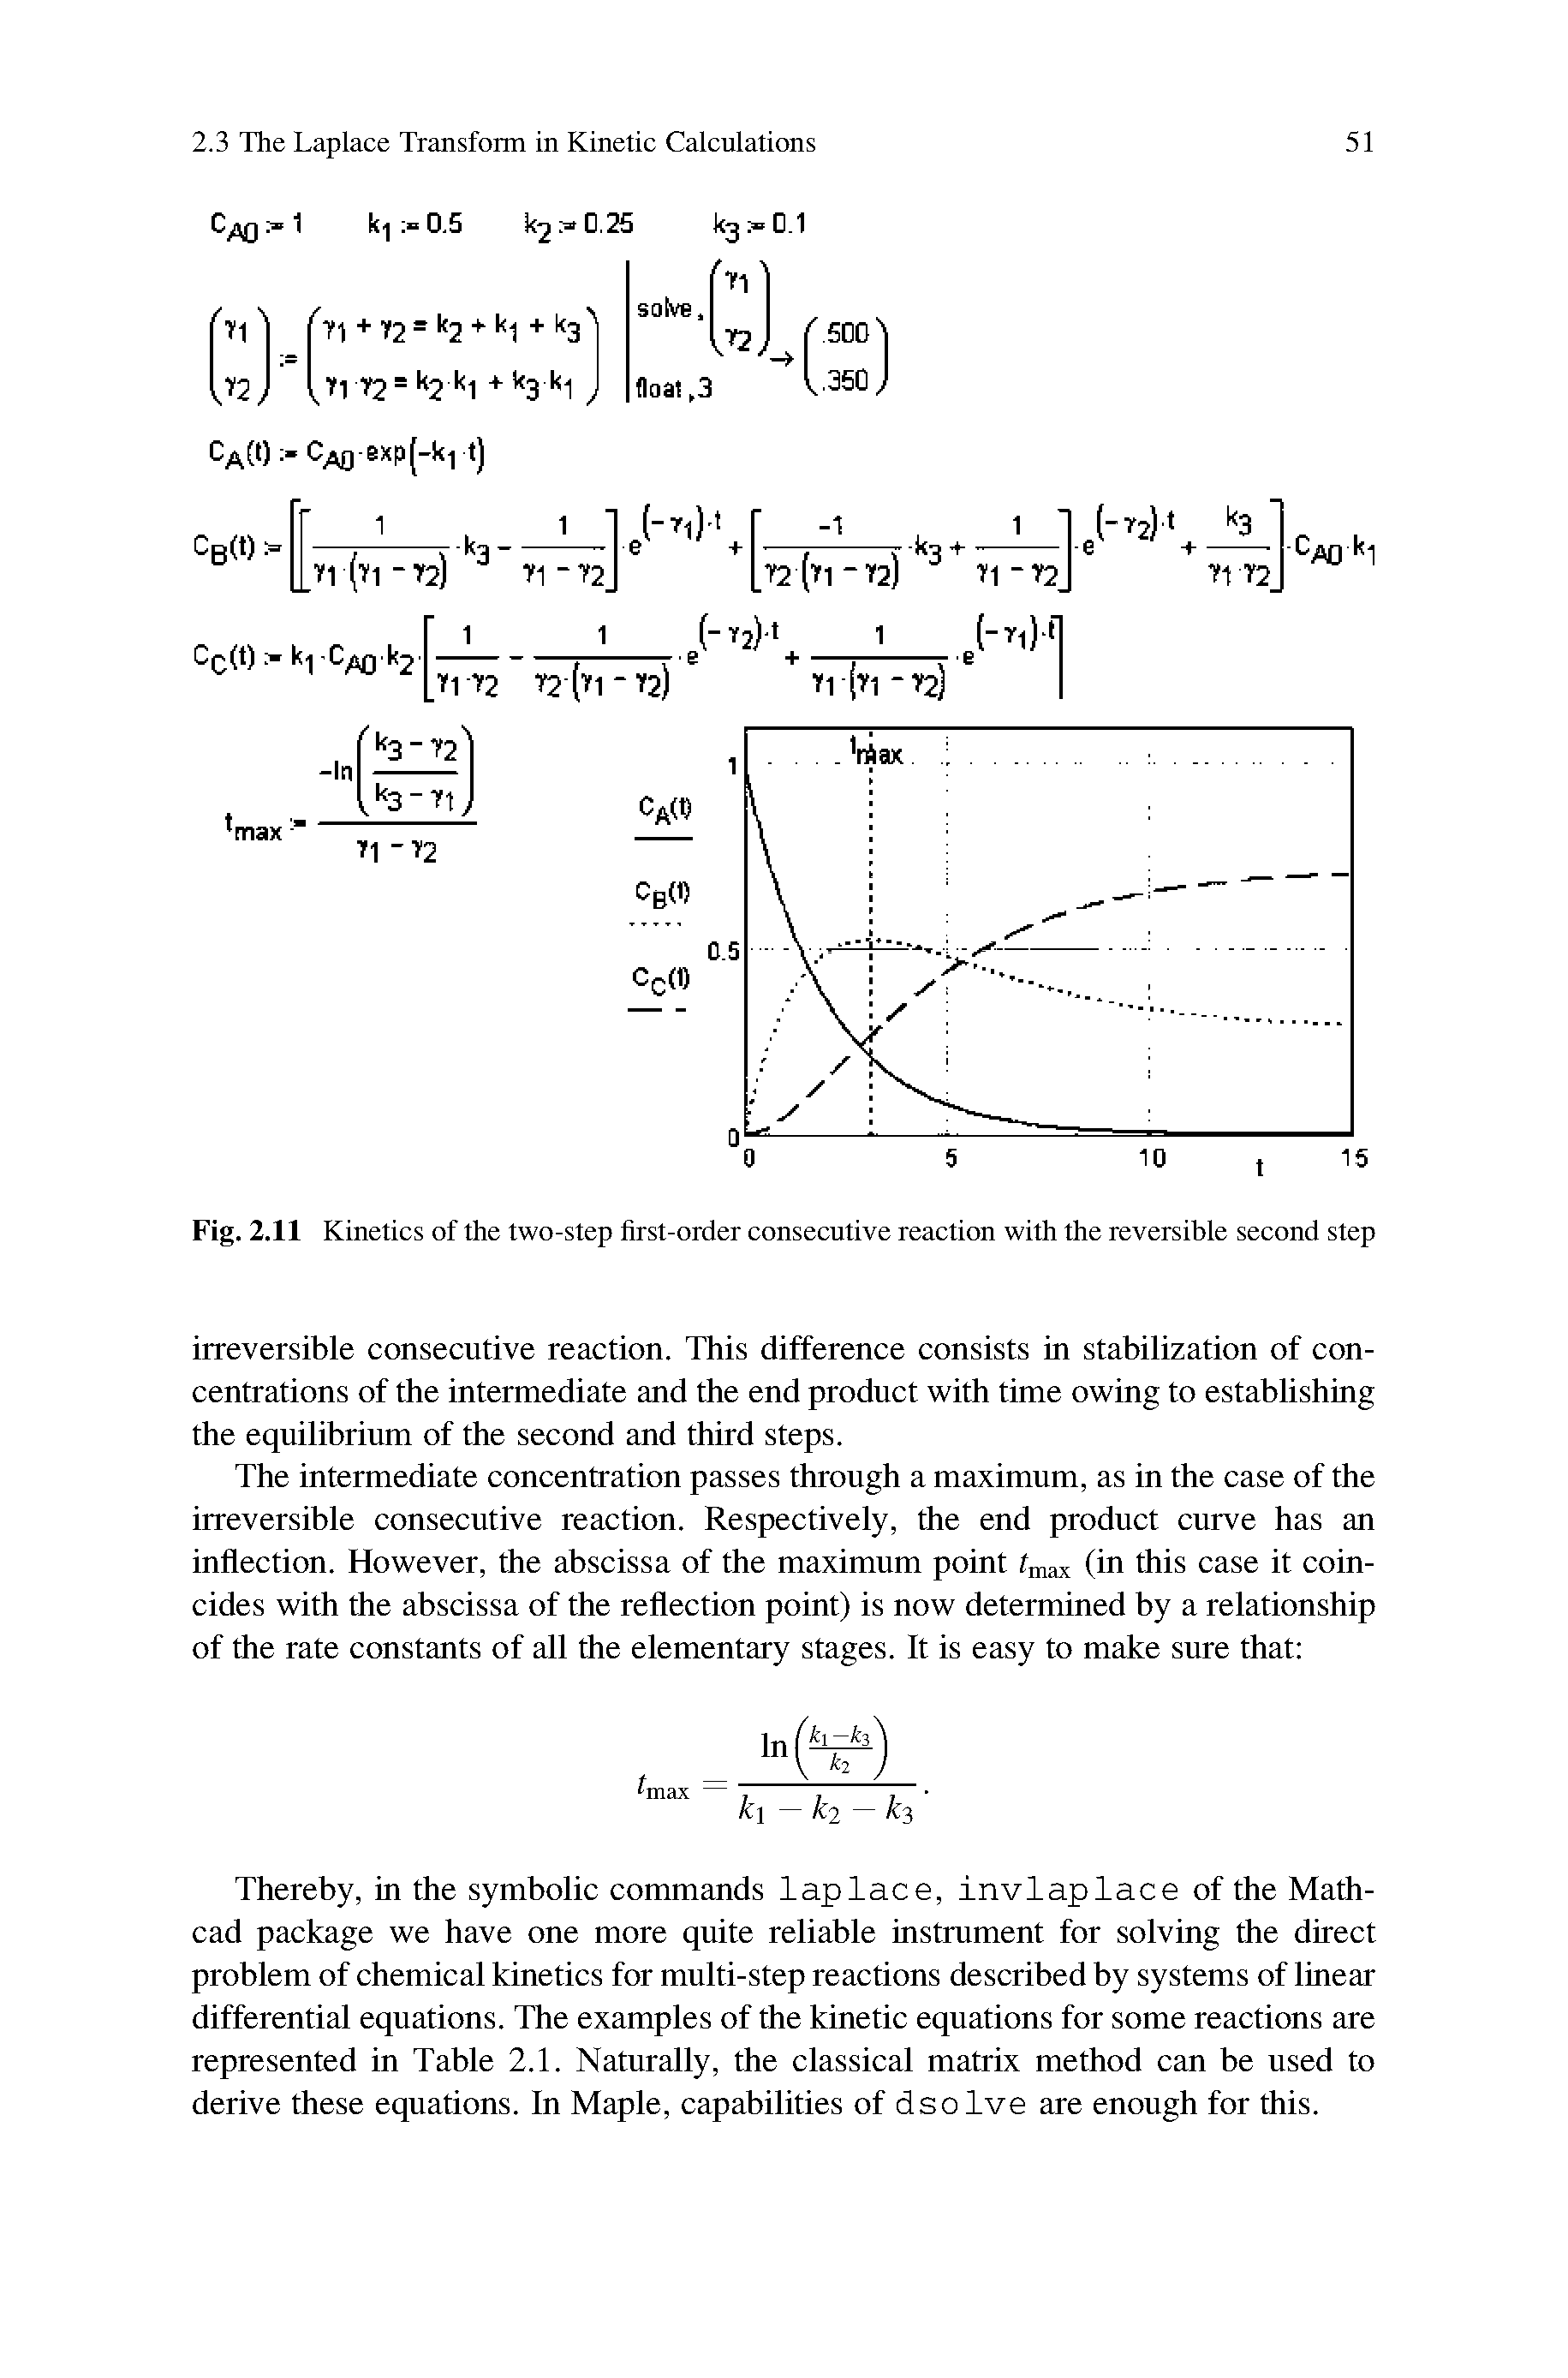 Fig. 2.11 Kinetics of the two-step first-order consecutive reaction with the reversible second step...